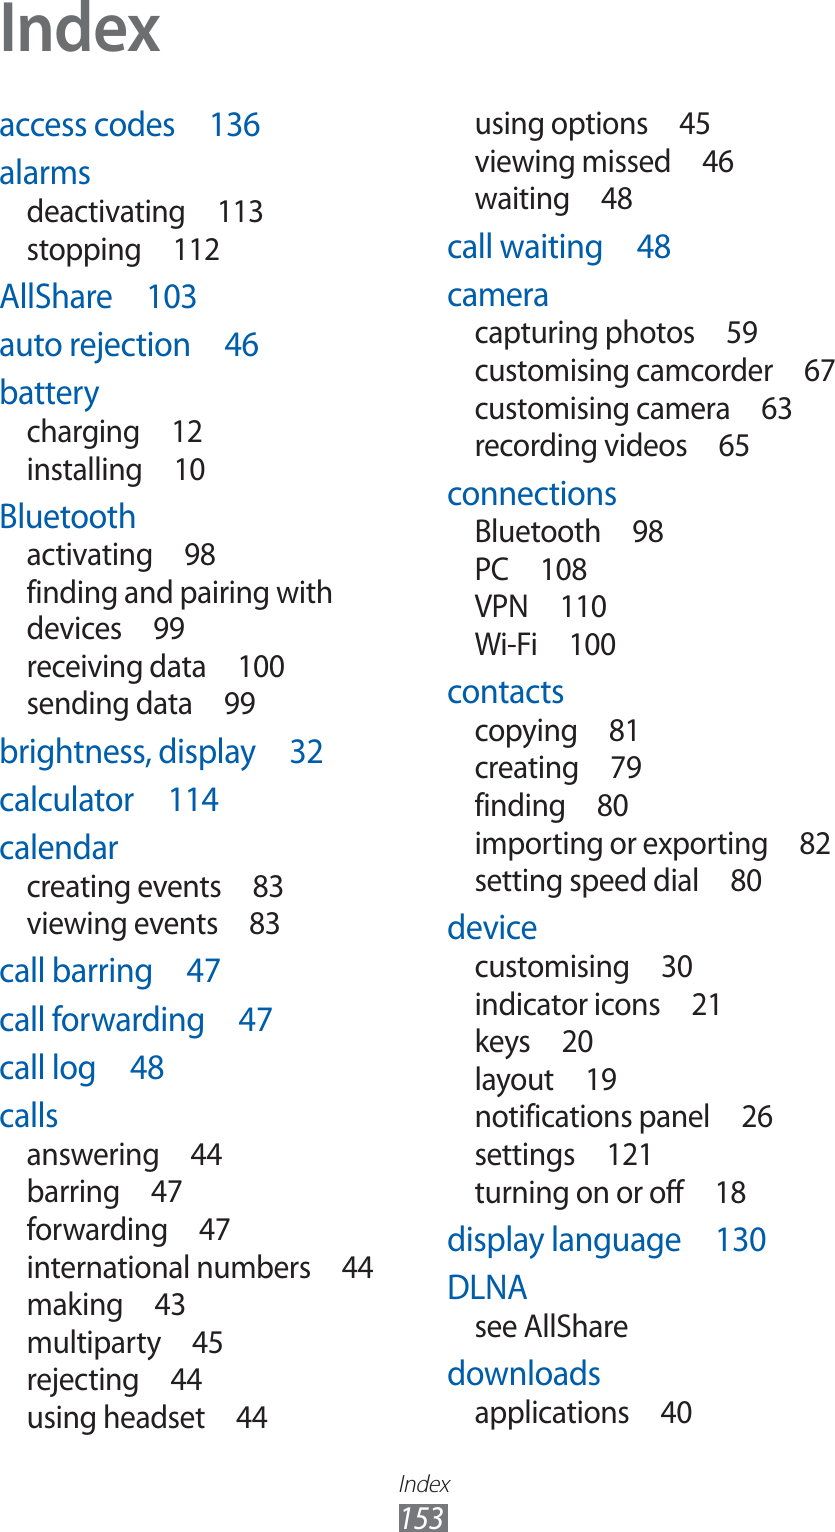 Index153access codes  136alarmsdeactivating 113stopping 112AllShare 103auto rejection  46batterycharging 12installing 10Bluetoothactivating 98finding and pairing with devices 99receiving data  100sending data  99brightness, display  32calculator 114calendarcreating events  83viewing events  83call barring  47call forwarding  47call log  48callsanswering 44barring 47forwarding 47international numbers  44making 43multiparty 45rejecting 44using headset  44using options  45viewing missed  46waiting 48call waiting  48cameracapturing photos  59customising camcorder  67customising camera  63recording videos  65connectionsBluetooth 98PC 108VPN 110Wi-Fi 100contactscopying 81creating 79finding 80importing or exporting  82setting speed dial  80devicecustomising 30indicator icons  21keys 20layout 19notifications panel  26settings 121turning on or off  18display language  130DLNAsee AllSharedownloadsapplications 40Index